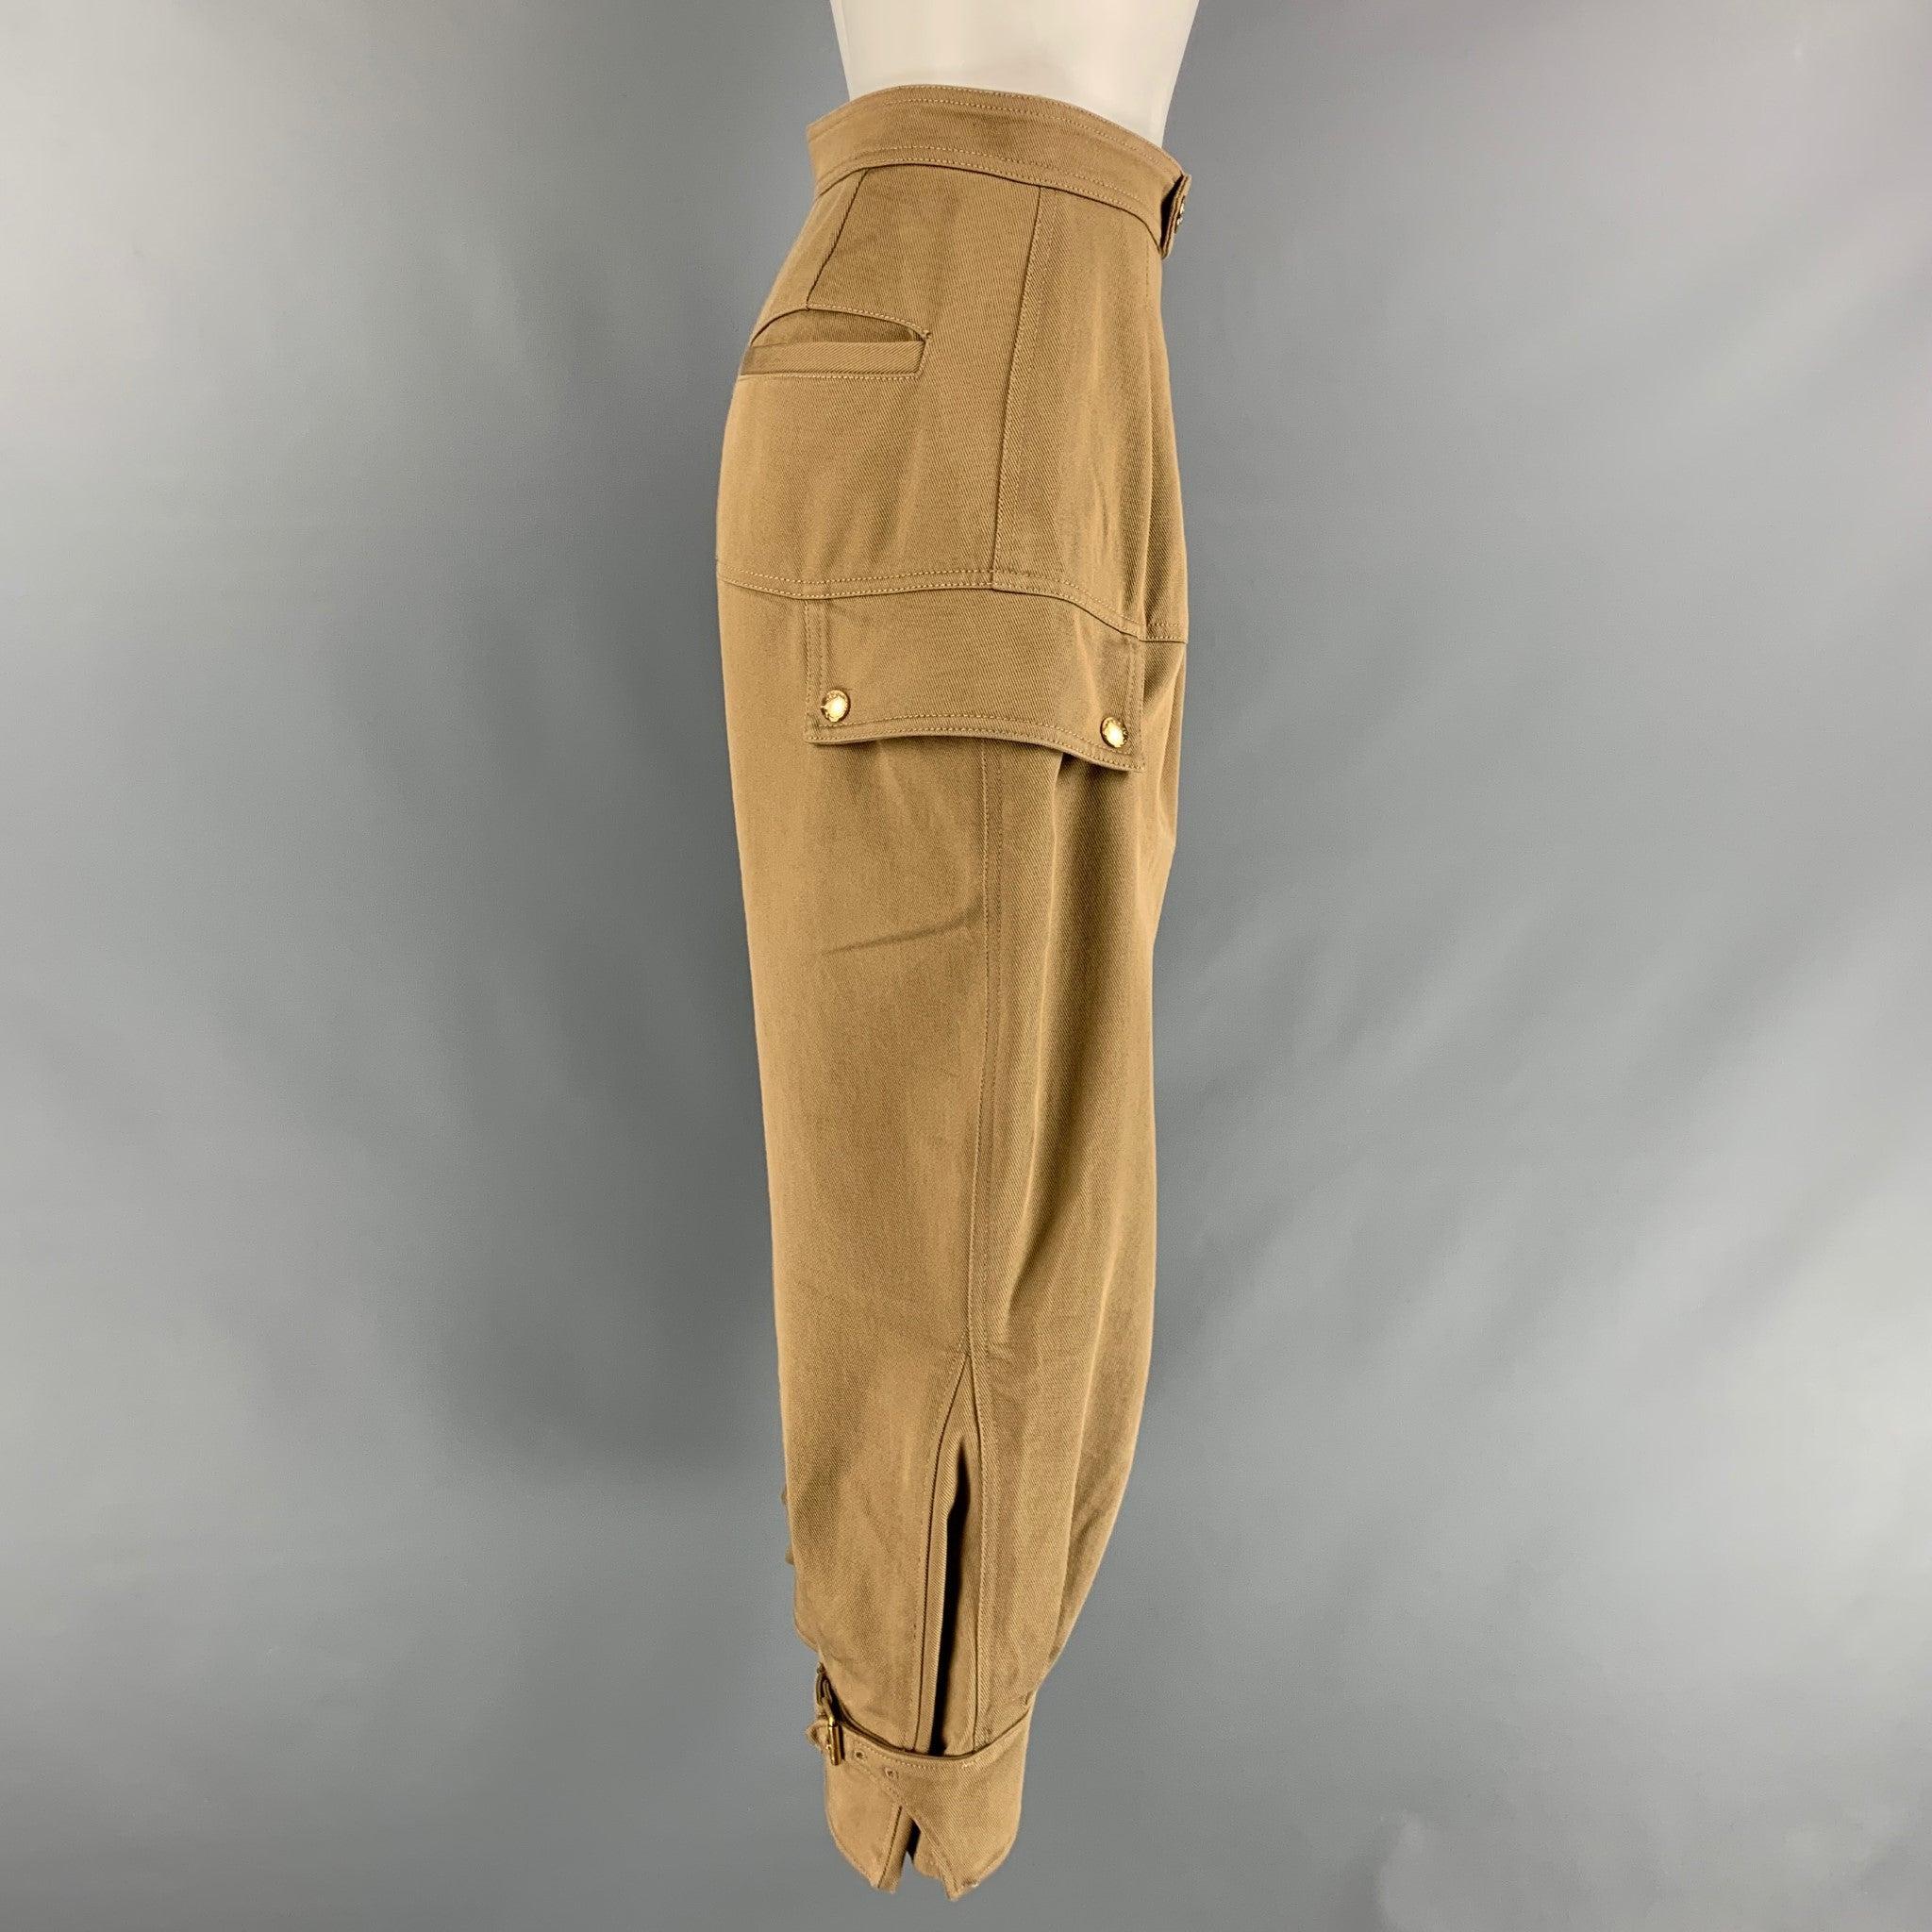 LOUIS VUITTON pants comes in a khaki cotton twill material featuring a cropped design, gold tone trim buttons, side zippers, and LV canvas tab detail. Made in Italy.Excellent Pre-Owned Condition. 

Marked:   34 

Measurements: 
  Waist: 28 inches